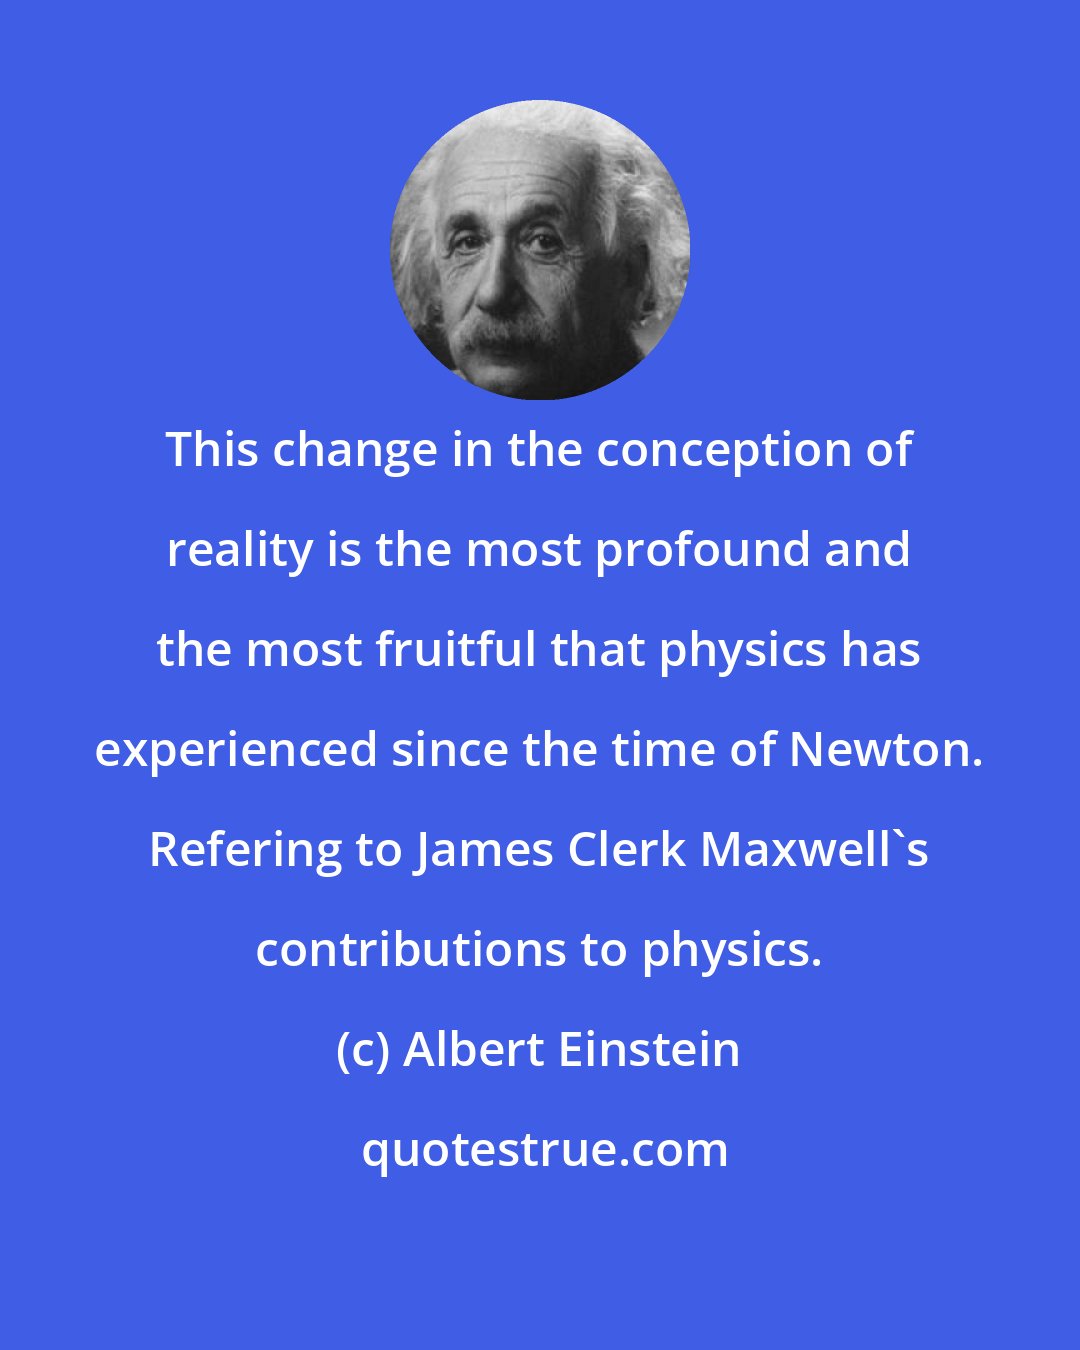 Albert Einstein: This change in the conception of reality is the most profound and the most fruitful that physics has experienced since the time of Newton. Refering to James Clerk Maxwell's contributions to physics.